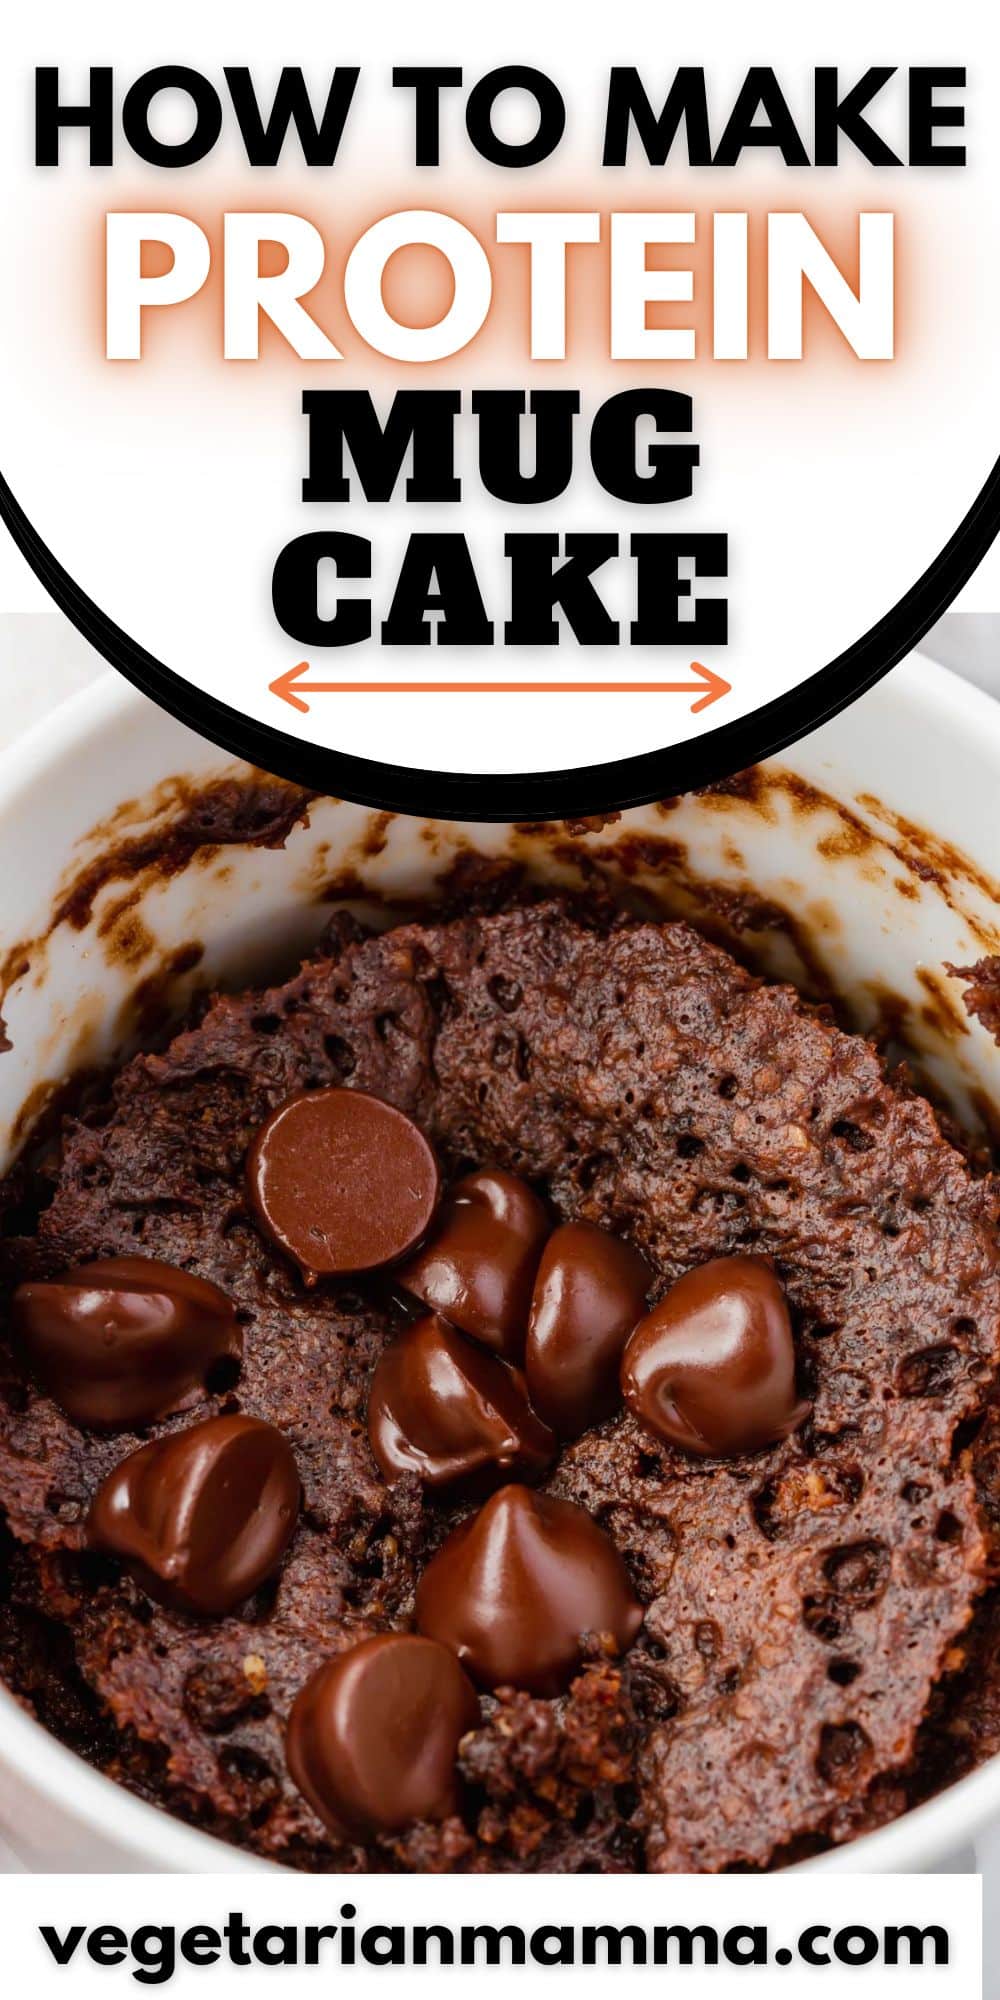 A decadent chocolate cake for one bakes up spongy and light in the microwave! This tasty high-protein mug cake is the perfect splurge.